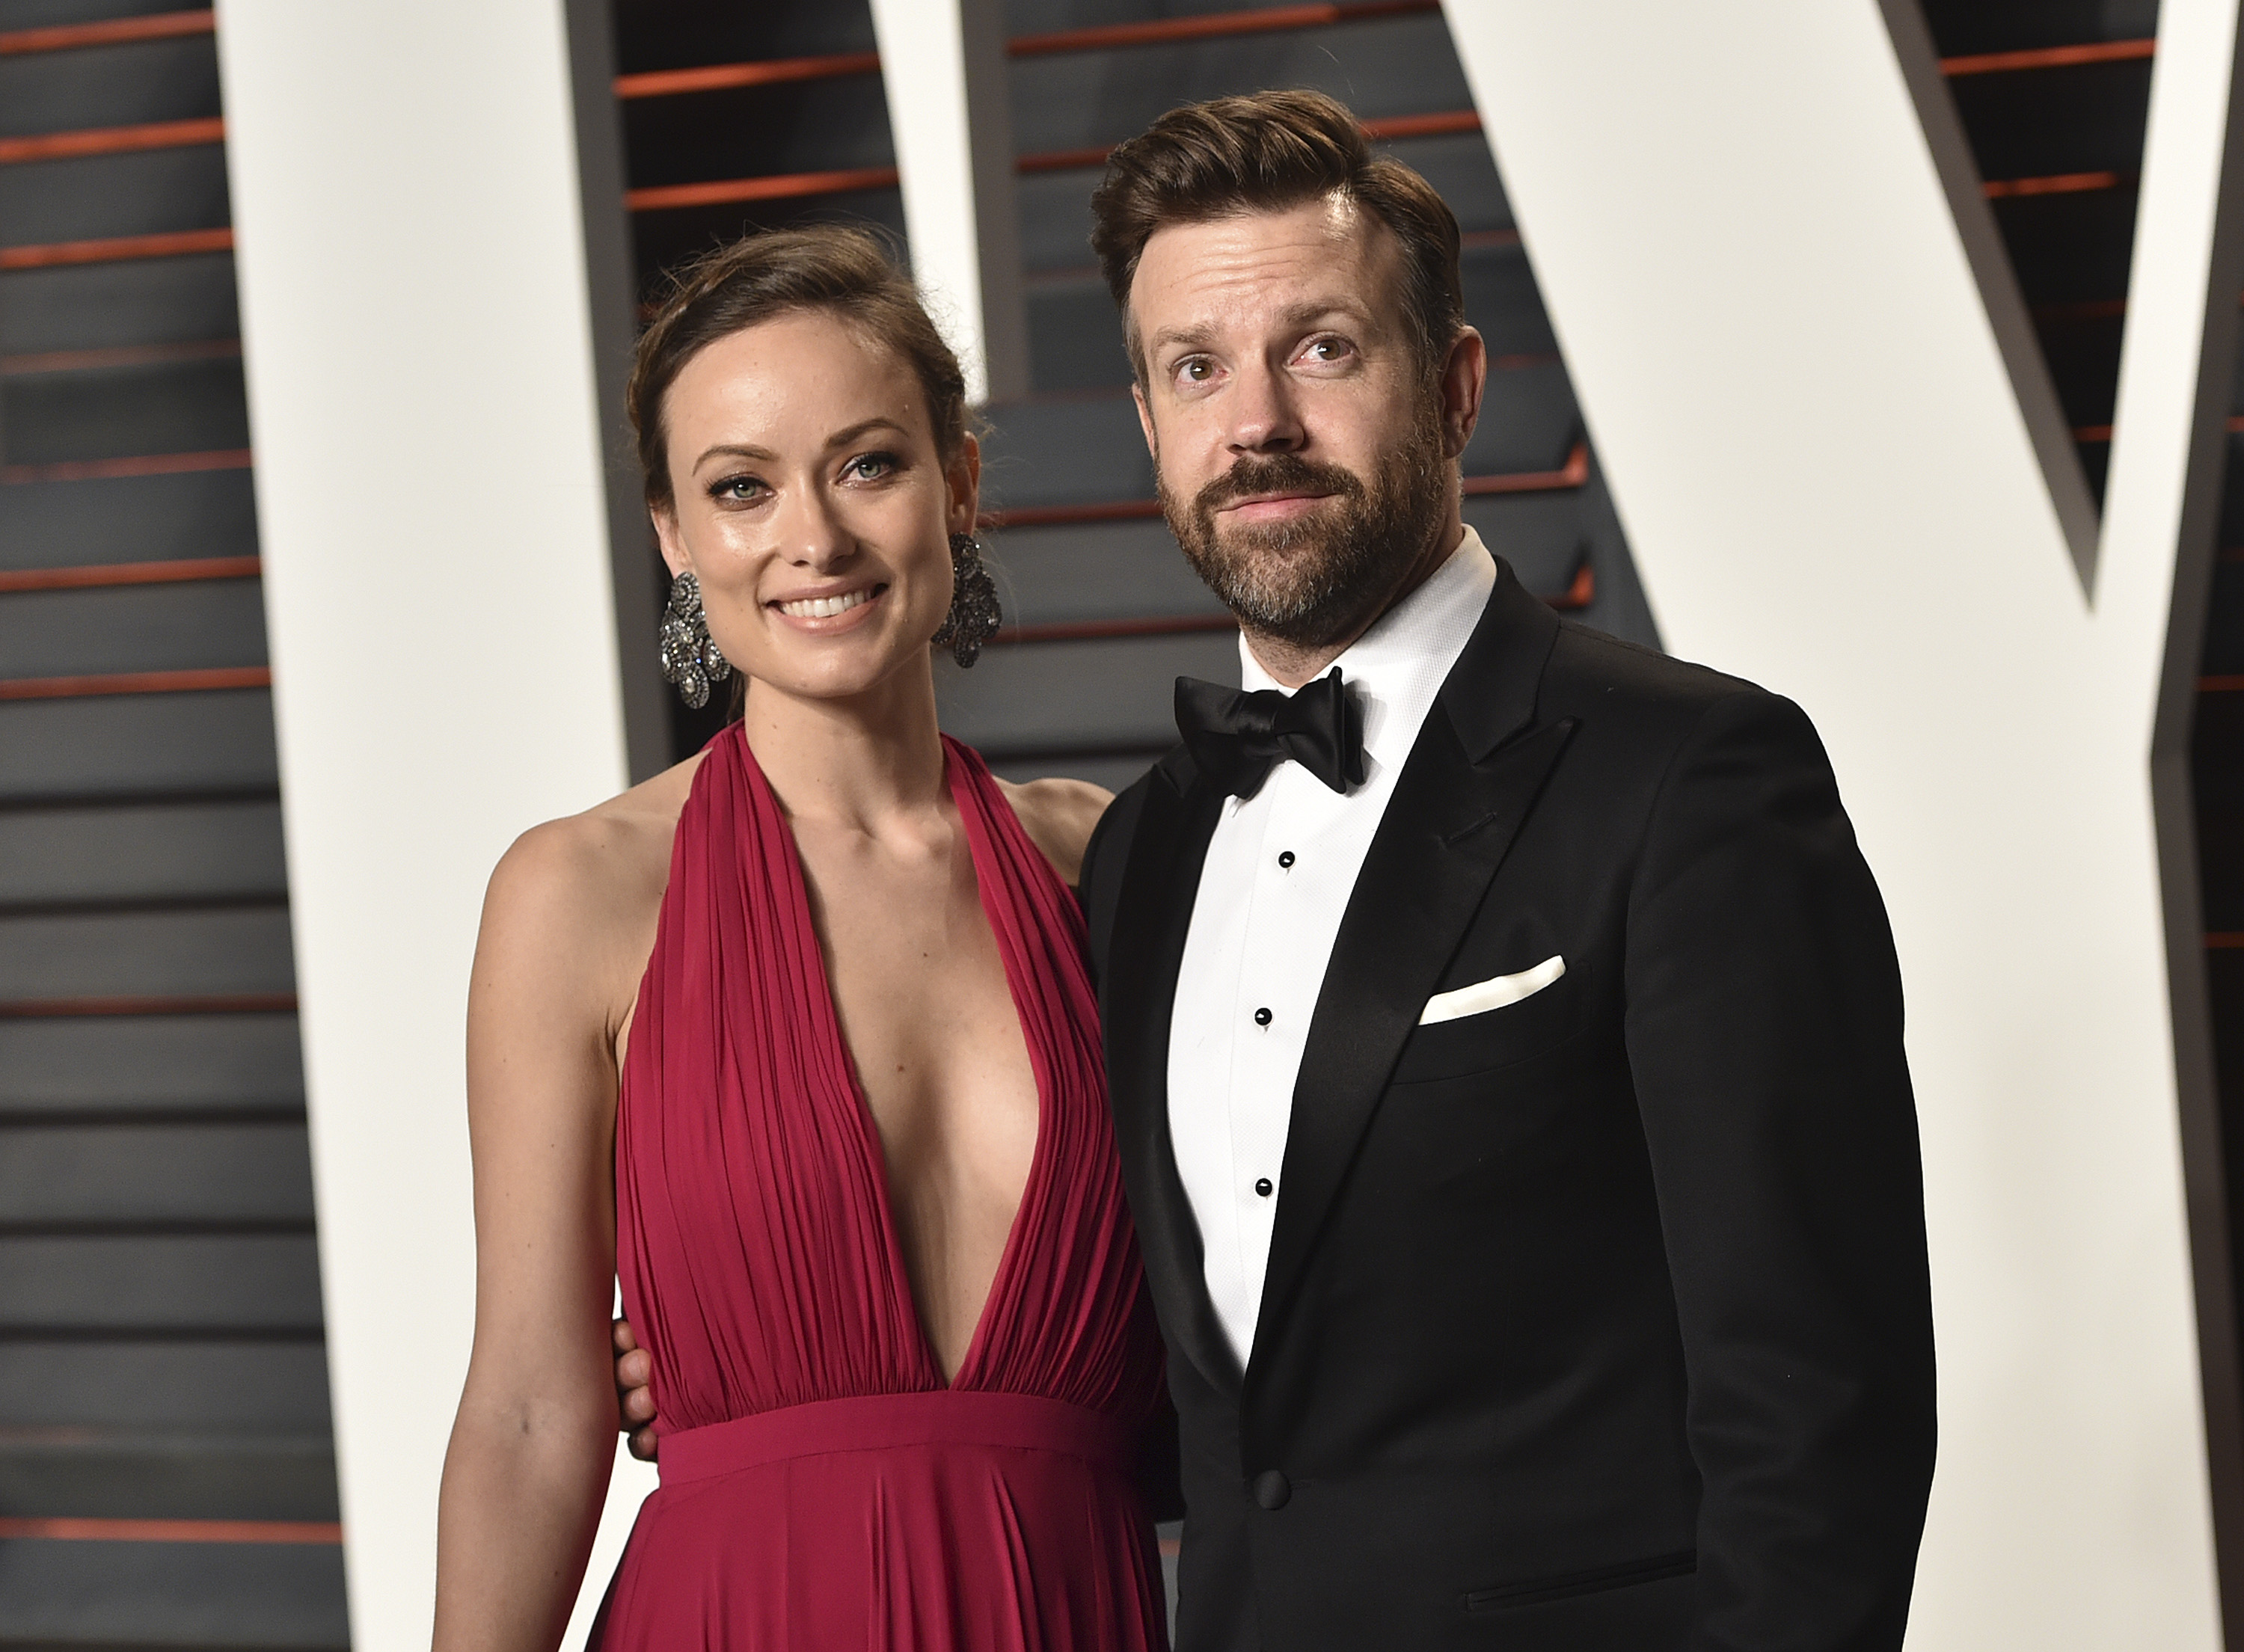 Actress Olivia Wilde (L) and actor Jason Sudeikis arrive at the 2016 Vanity Fair Oscar Party Hosted By Graydon Carter at Wallis Annenberg Center for the Performing Arts on February 28, 2016 in Beverly Hills, California. (John Shearer&mdash;Getty Images)